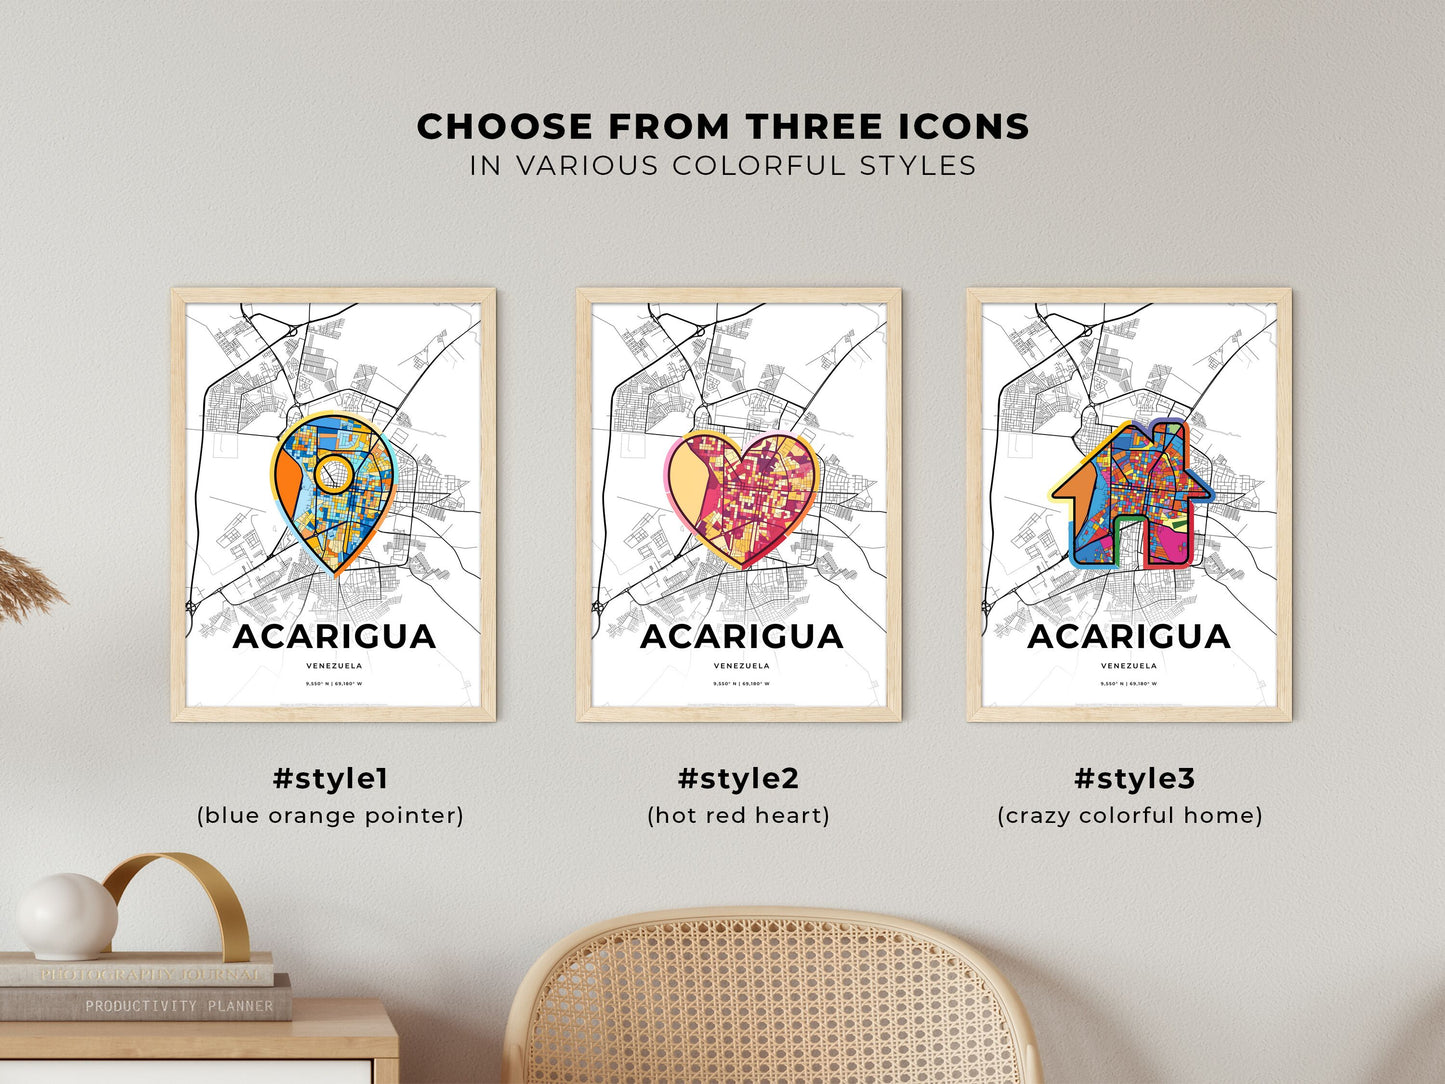 ACARIGUA VENEZUELA minimal art map with a colorful icon. Where it all began, Couple map gift.